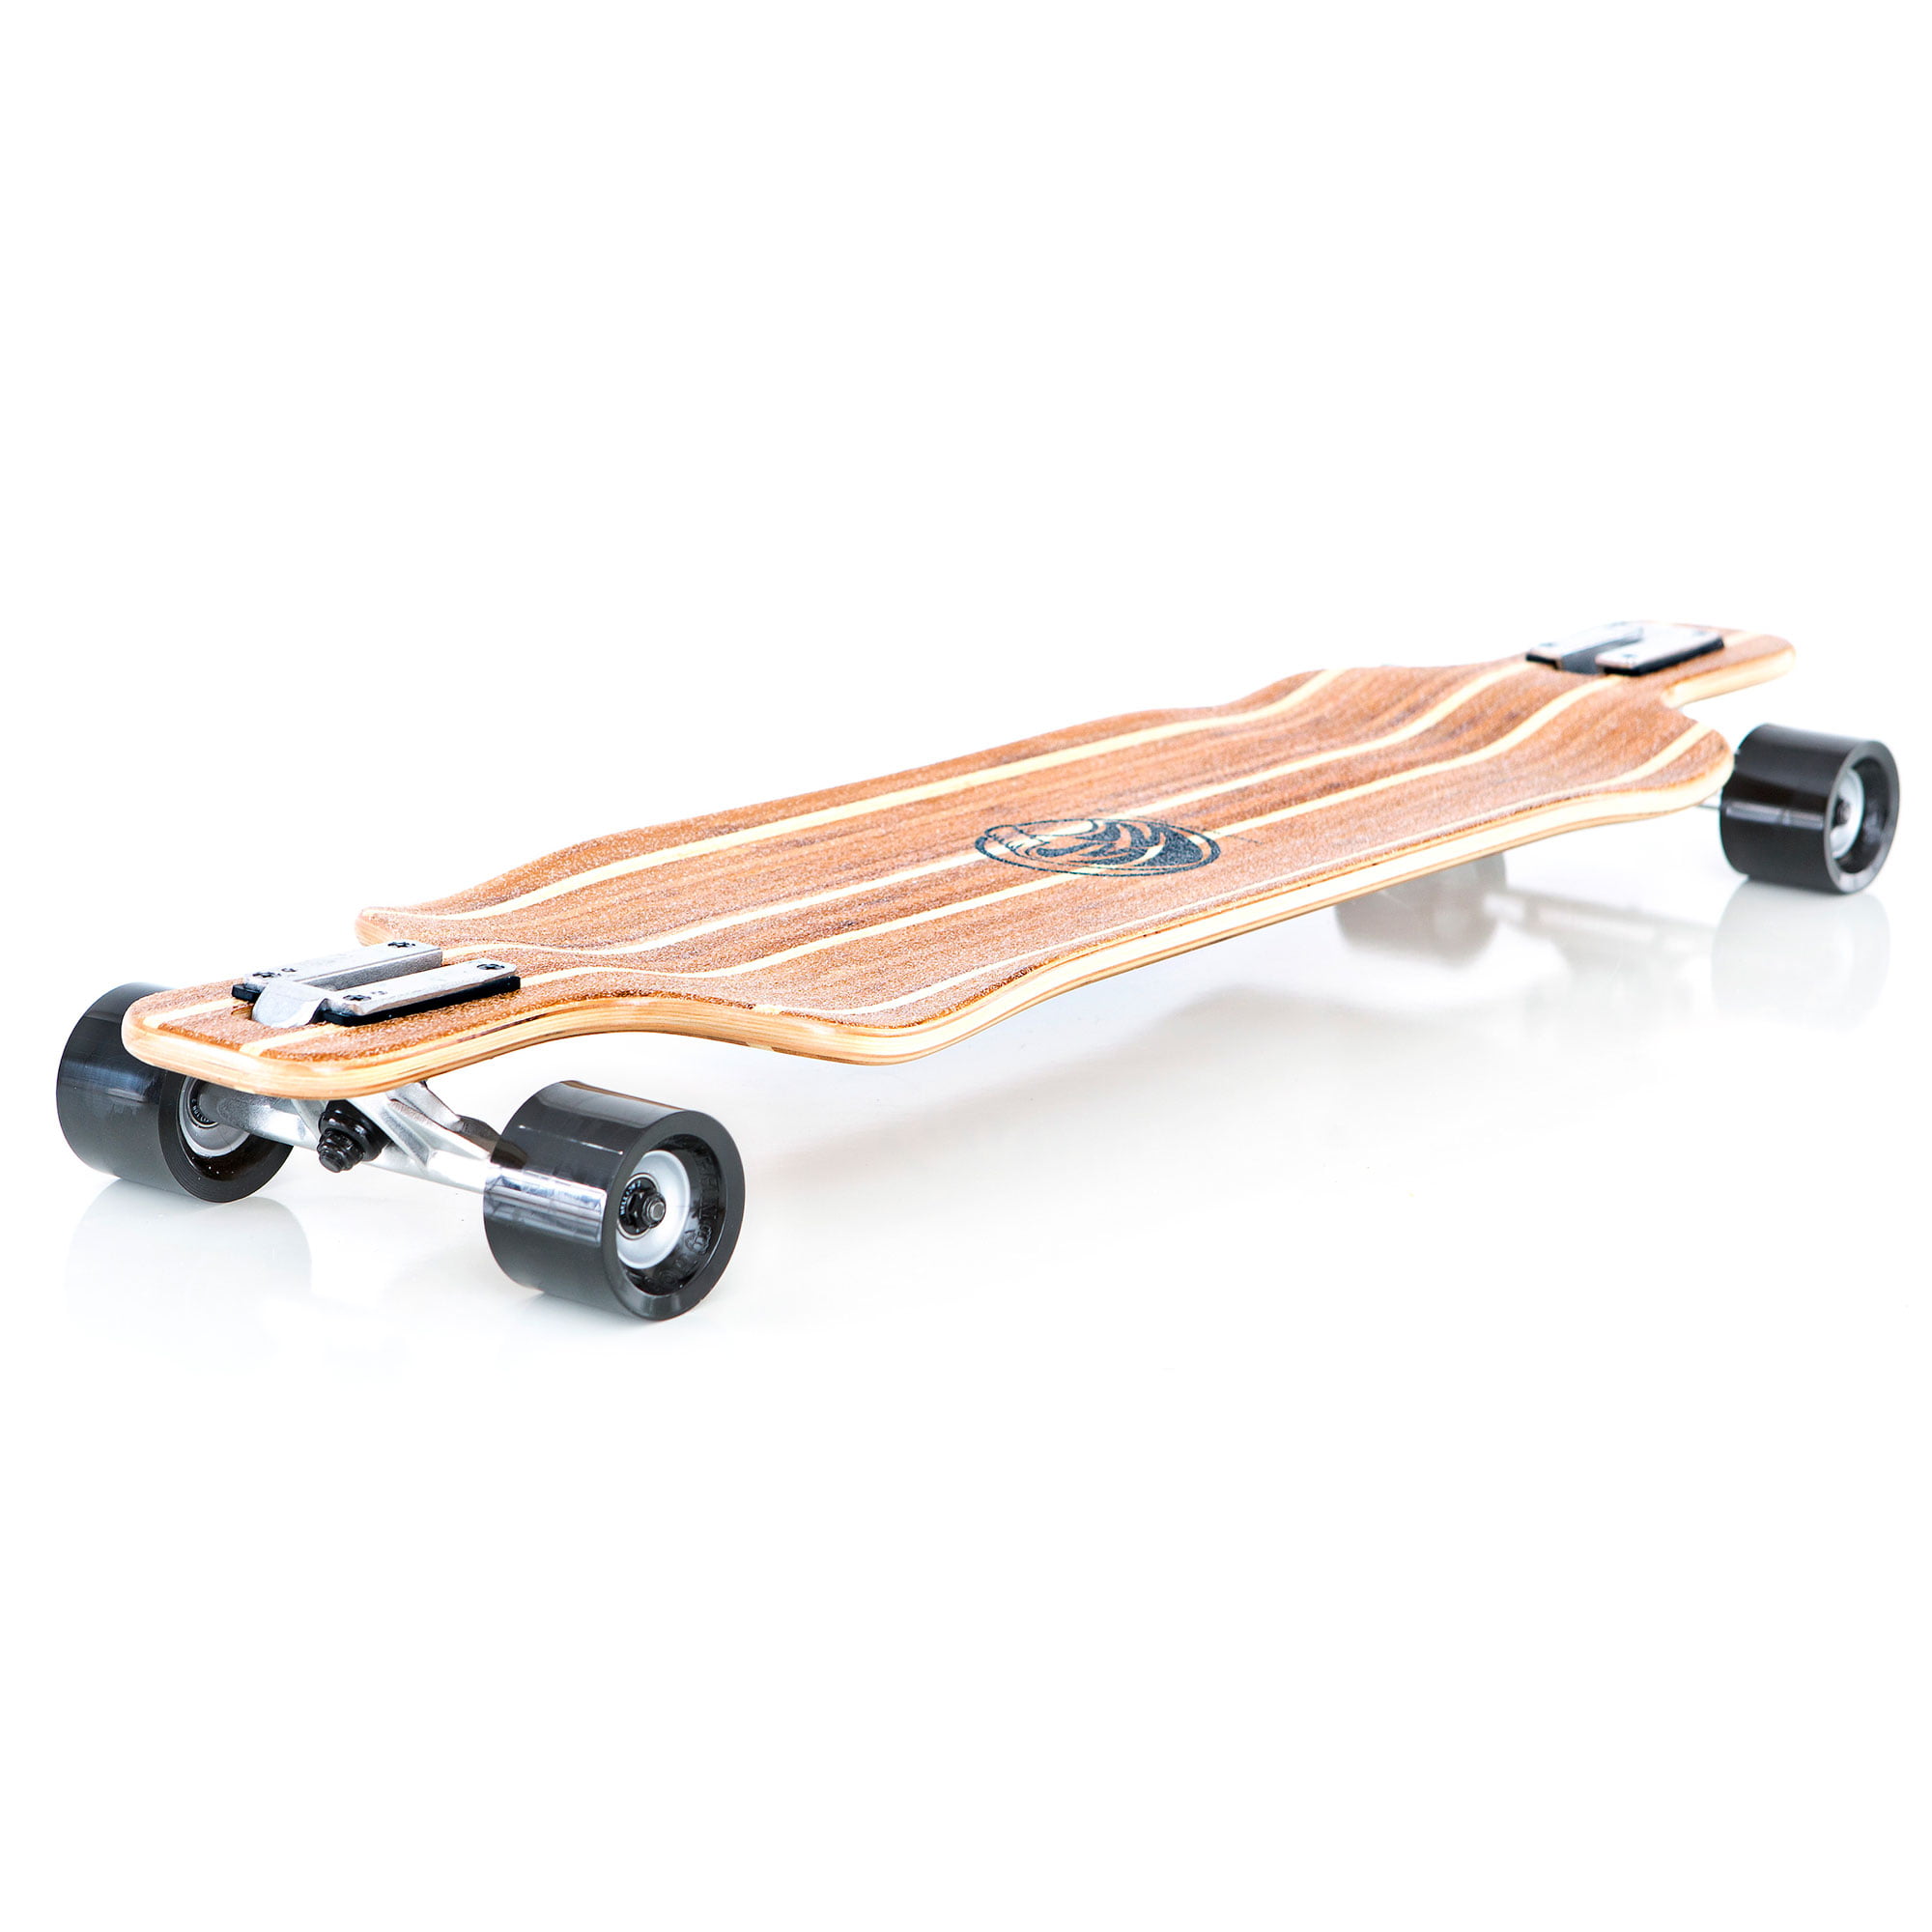 Two Bare Feet Canadian Maple Longboard Skateboards Completes